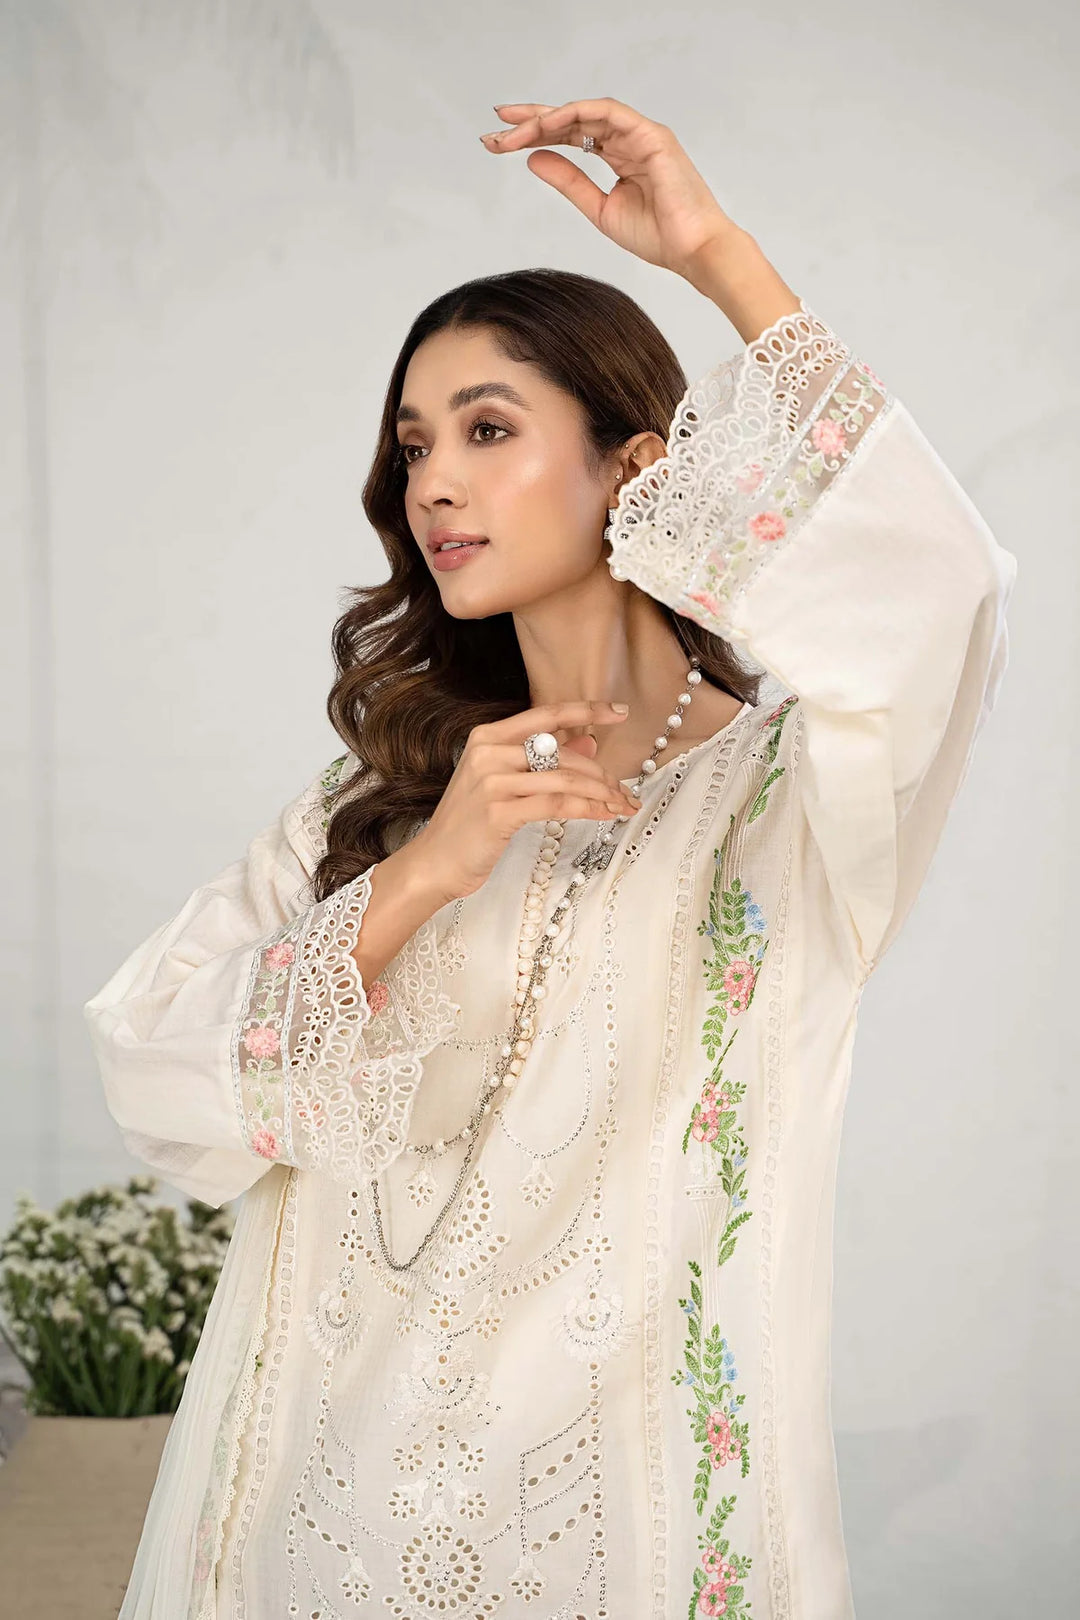 a Pakistani woman in a white dress posing for a picture